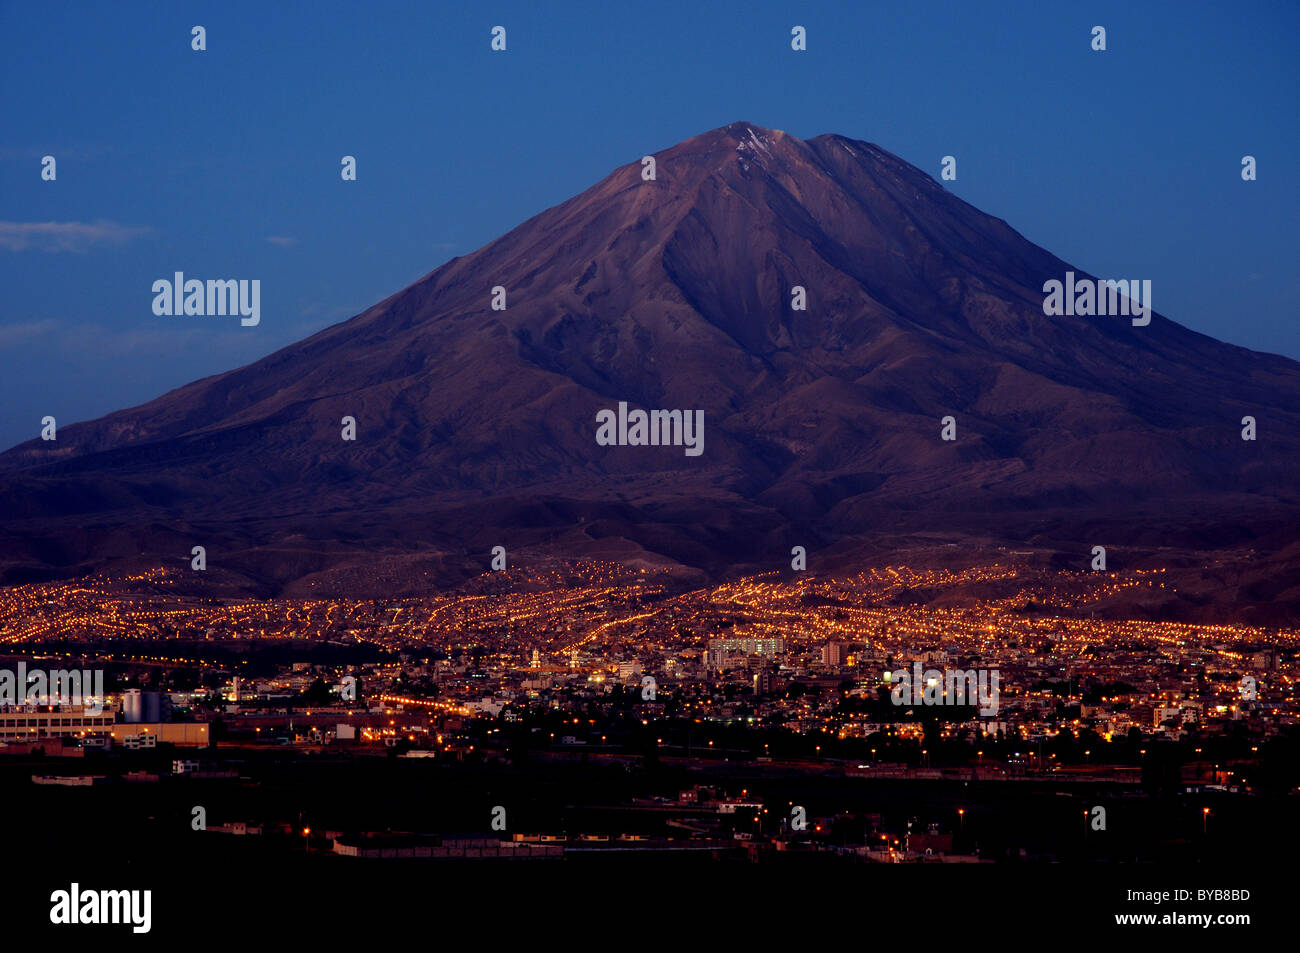 Arequipa (Volcán El Misti), Arequipa is surrounded by three…